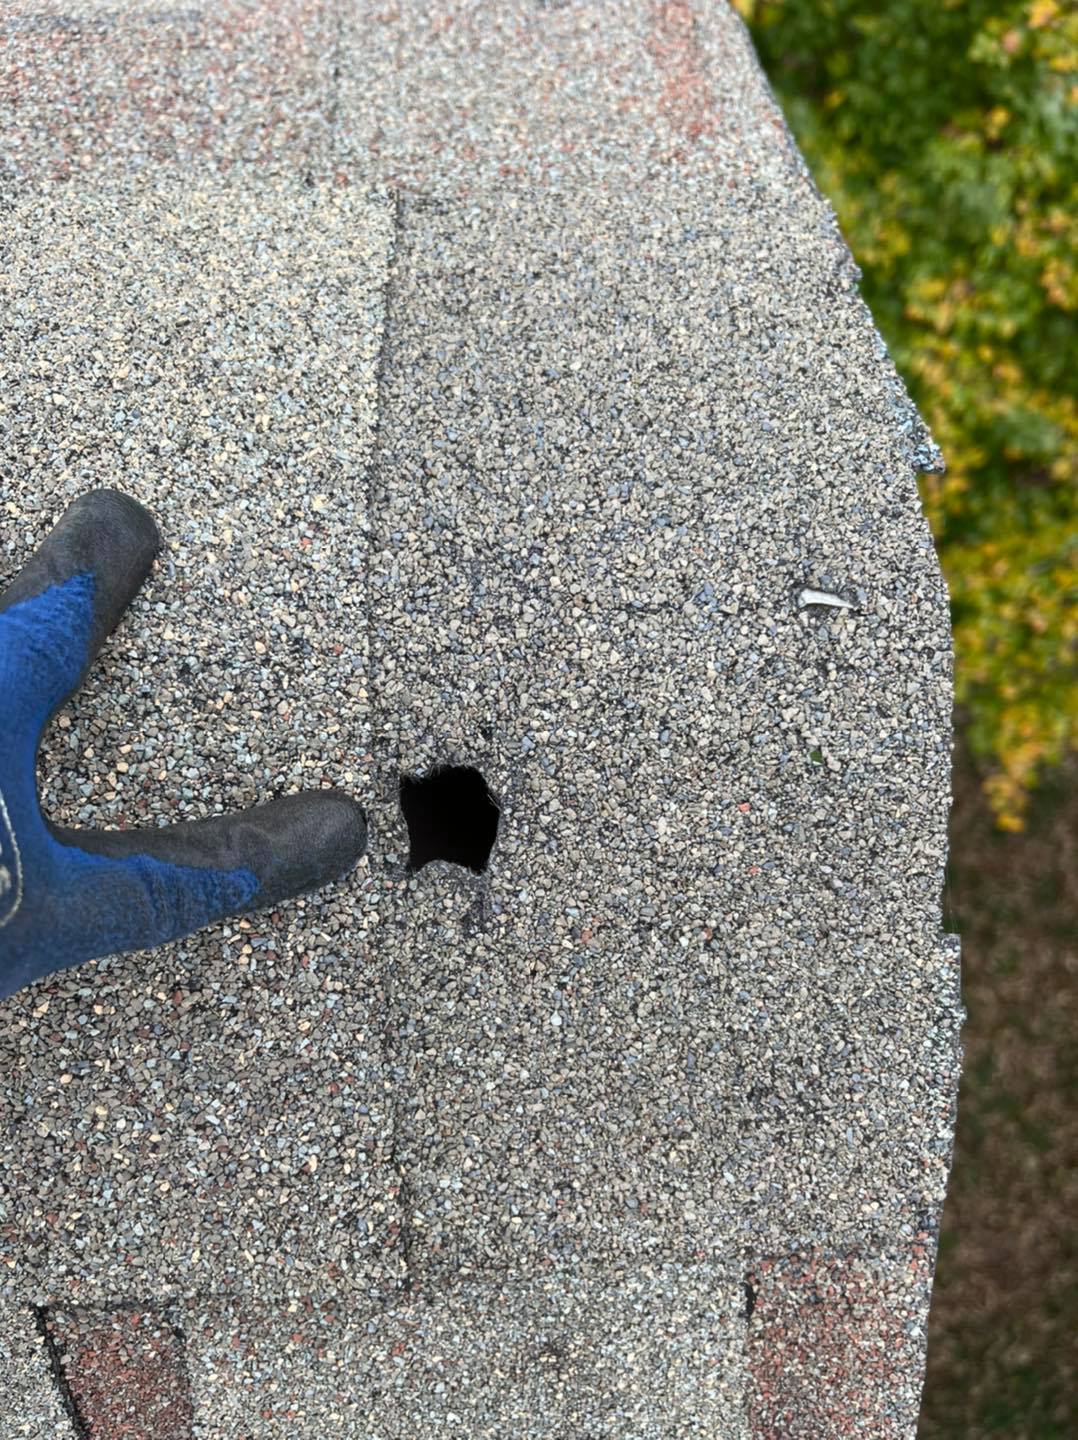 An example of a hole in the shingles on a client's roof caused by storm damage